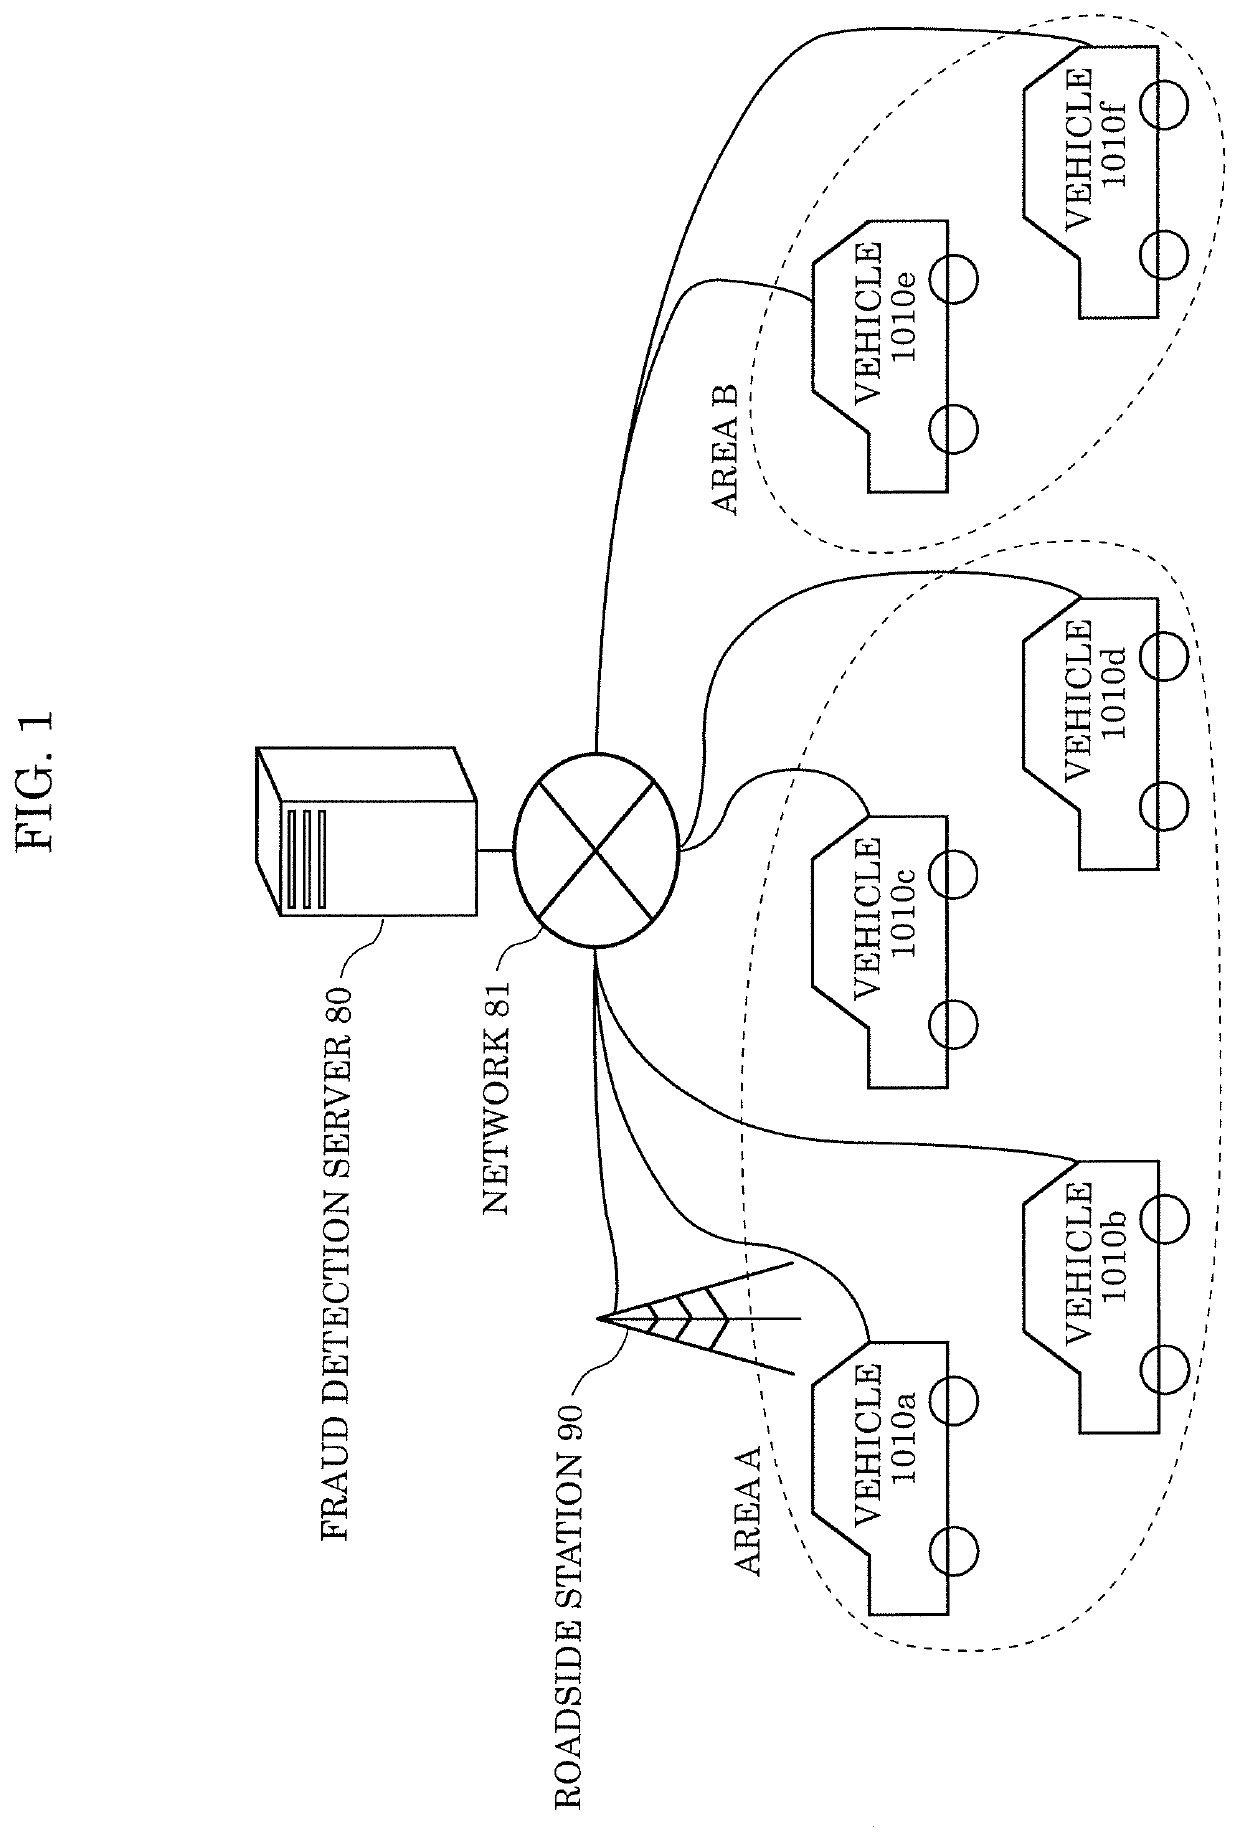 Vehicle monitoring apparatus, fraud detection server, and control methods